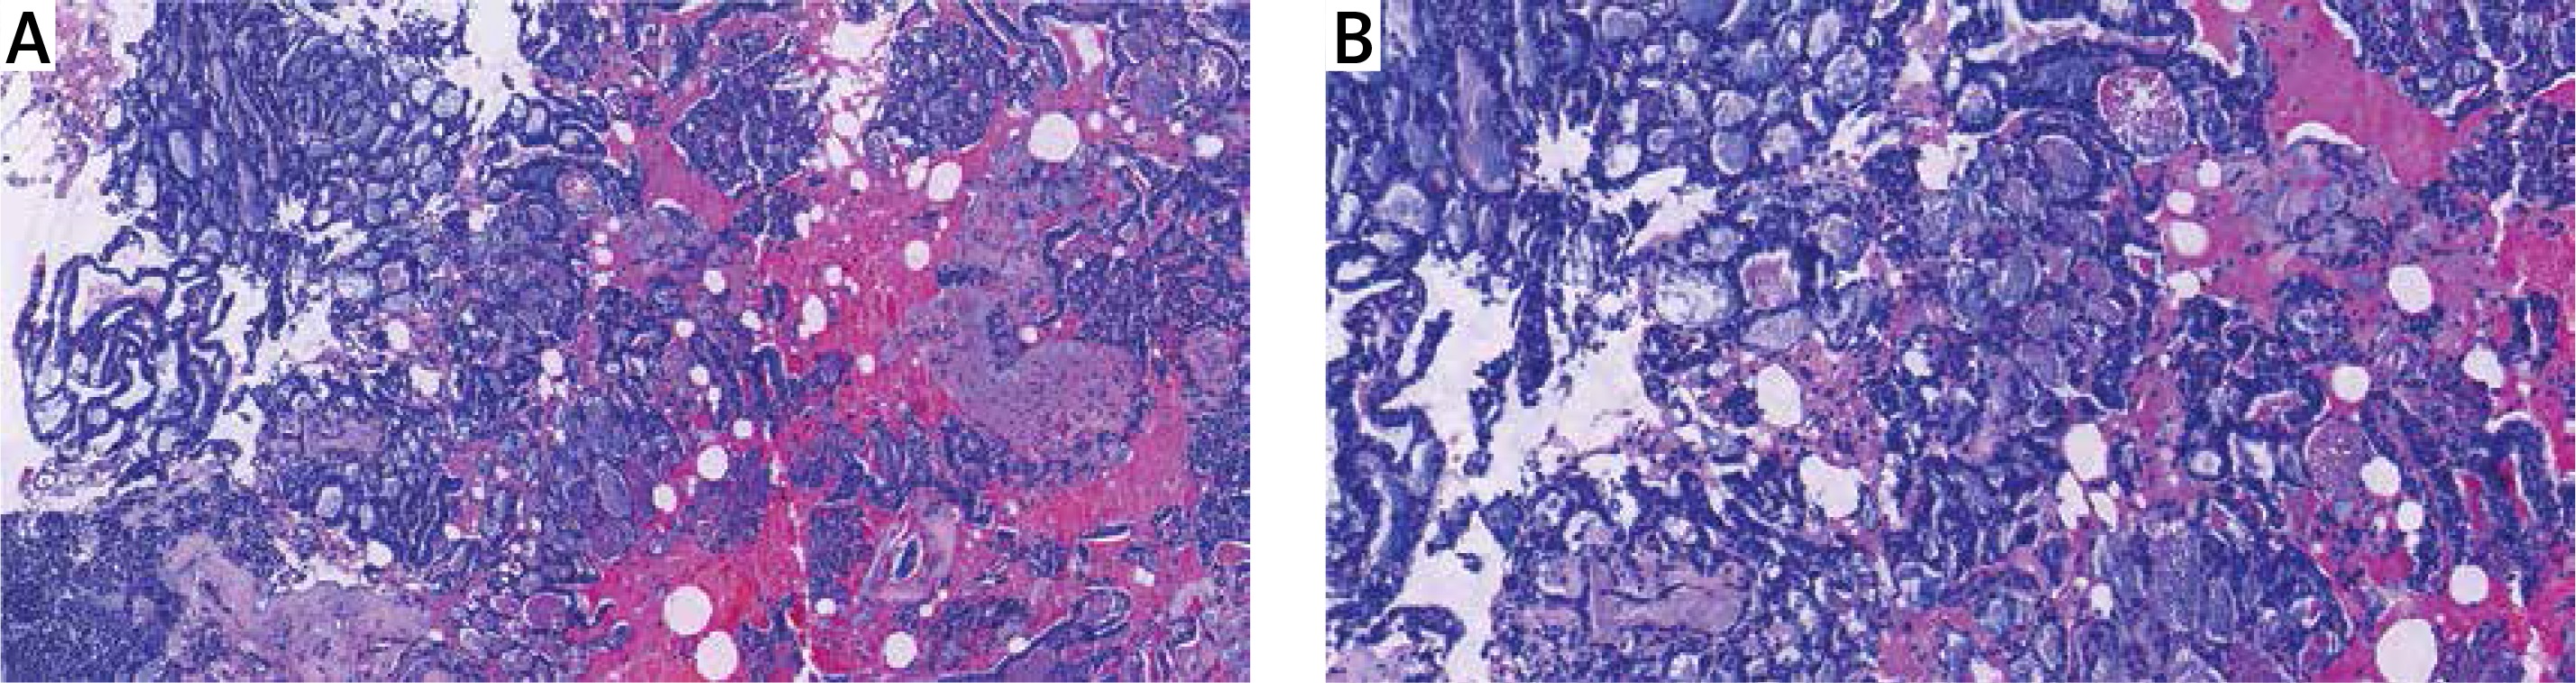 Diagnosis Of Adenoid Cystic Carcinoma In The Breast A Case Report And